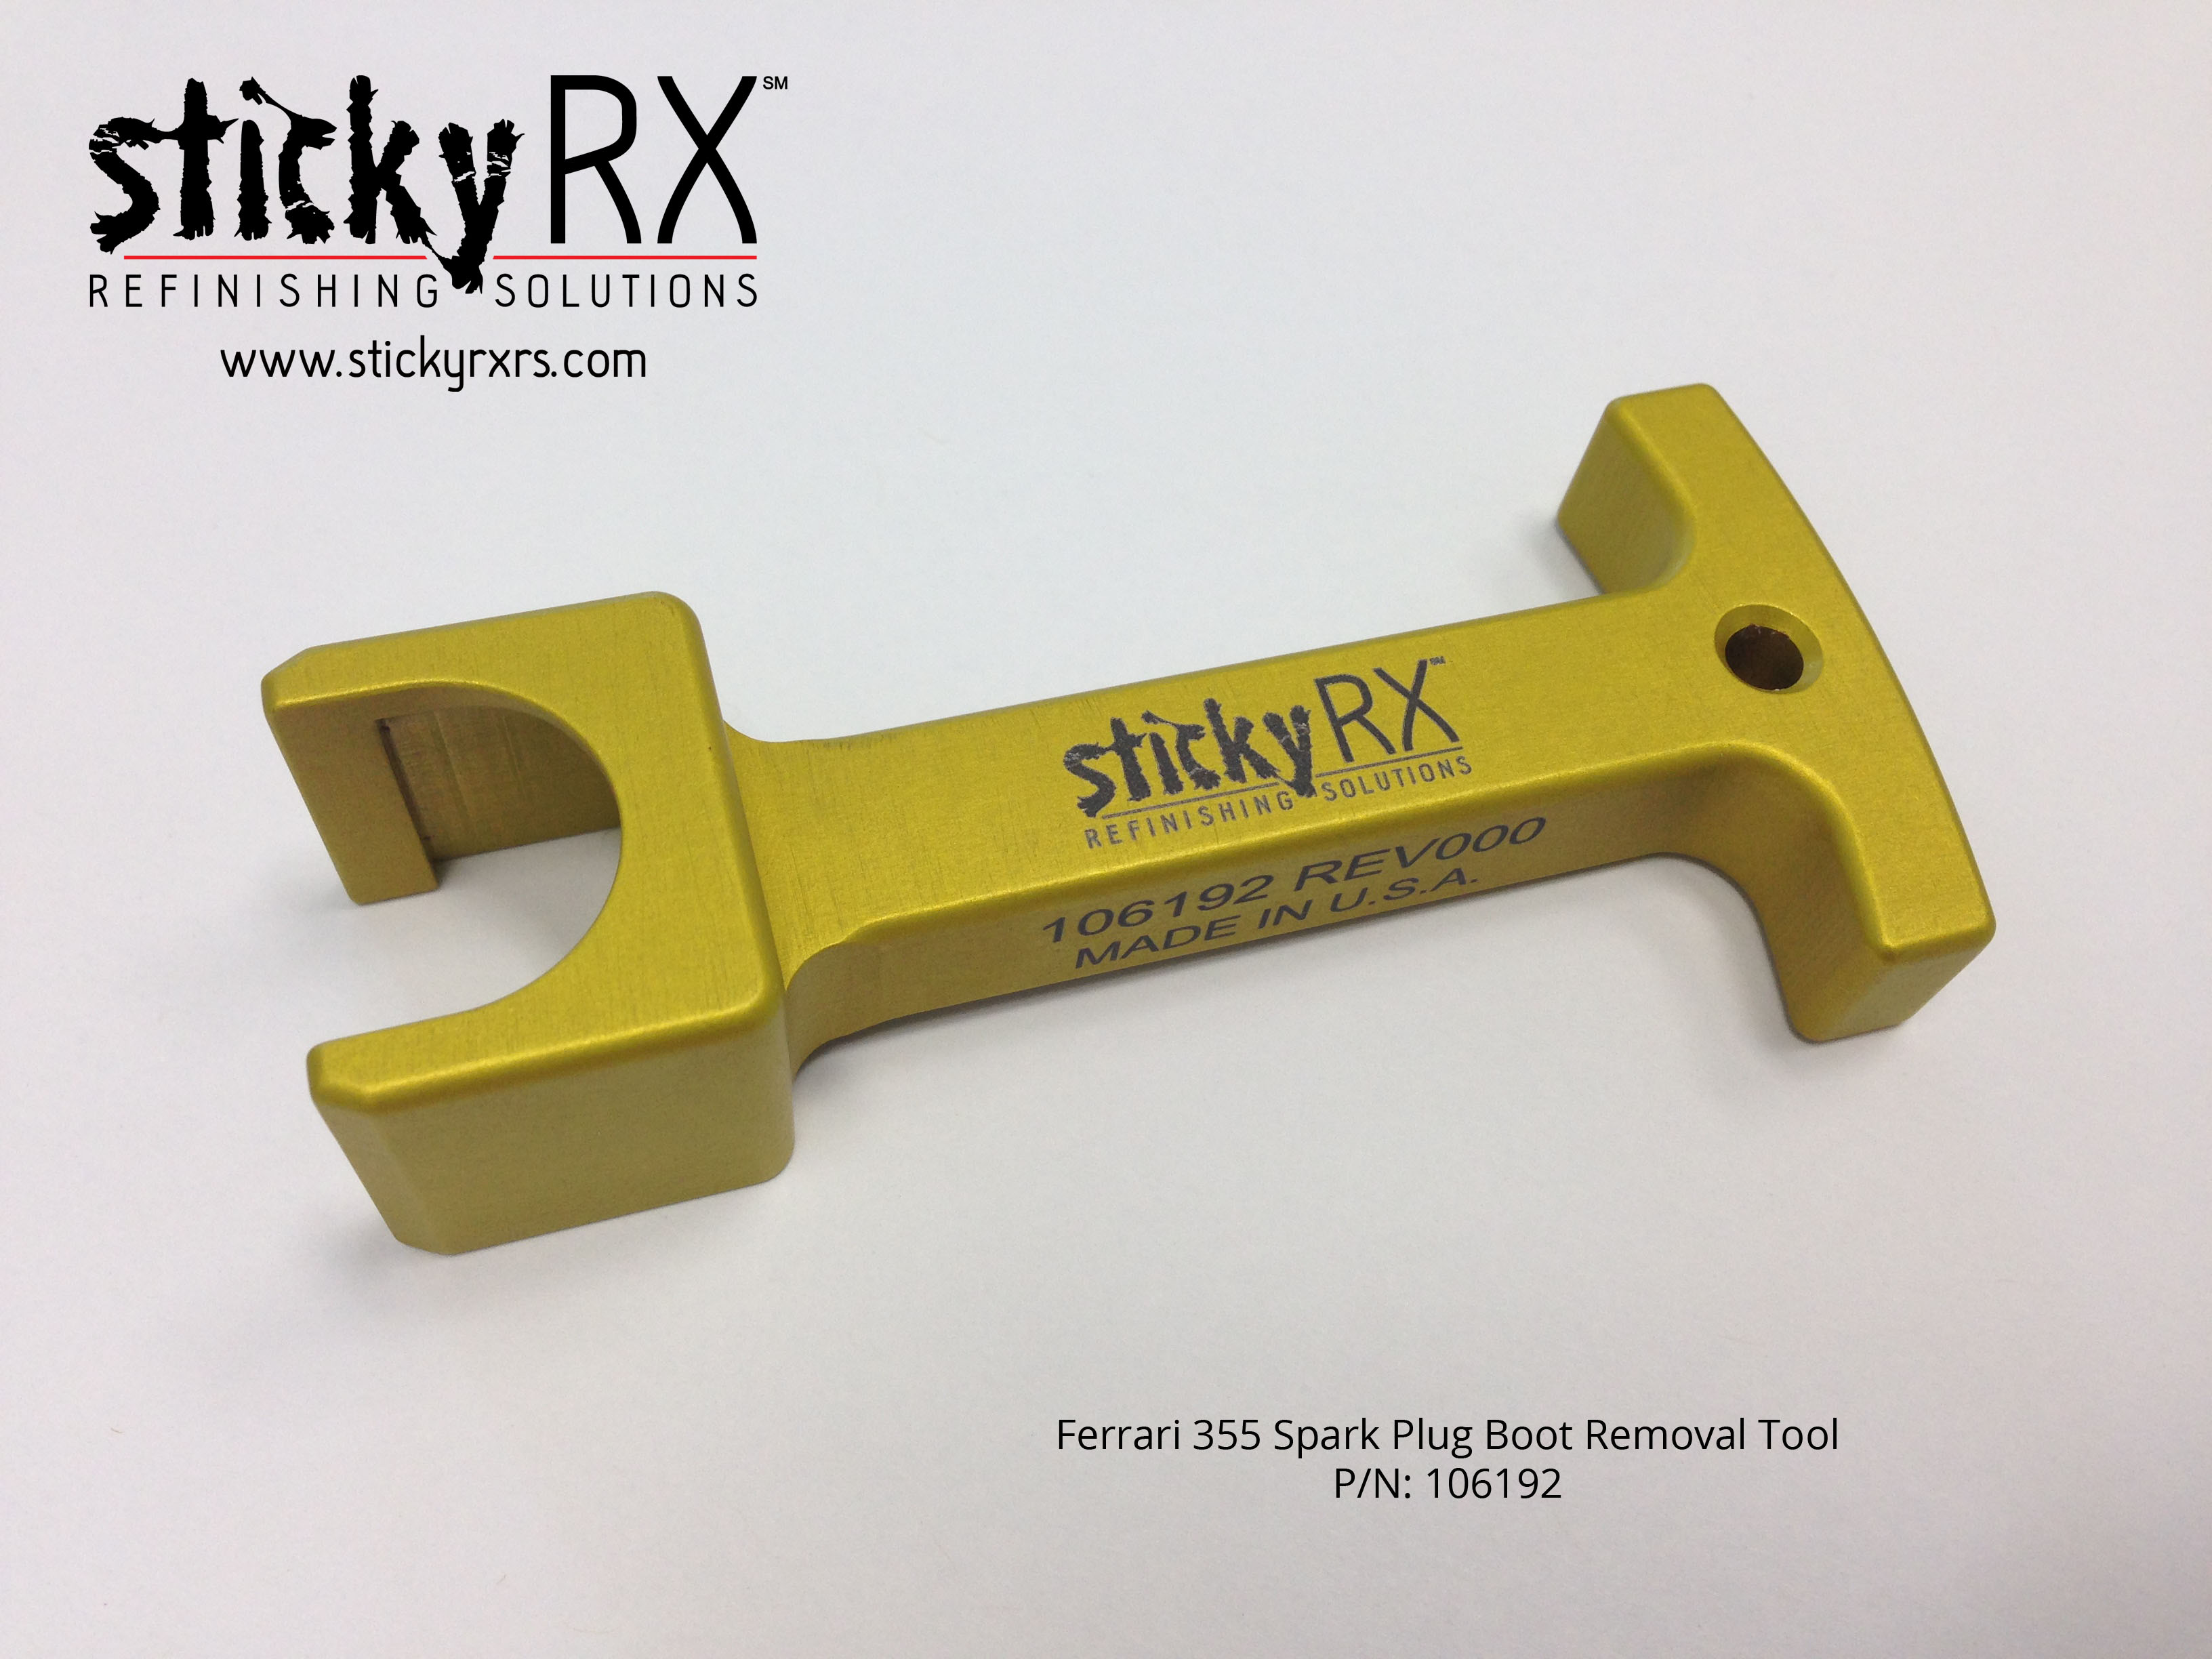 Sticky RX Refinishing Solutions Ferrari 355 Spark Plug Boot Removal Tool 01